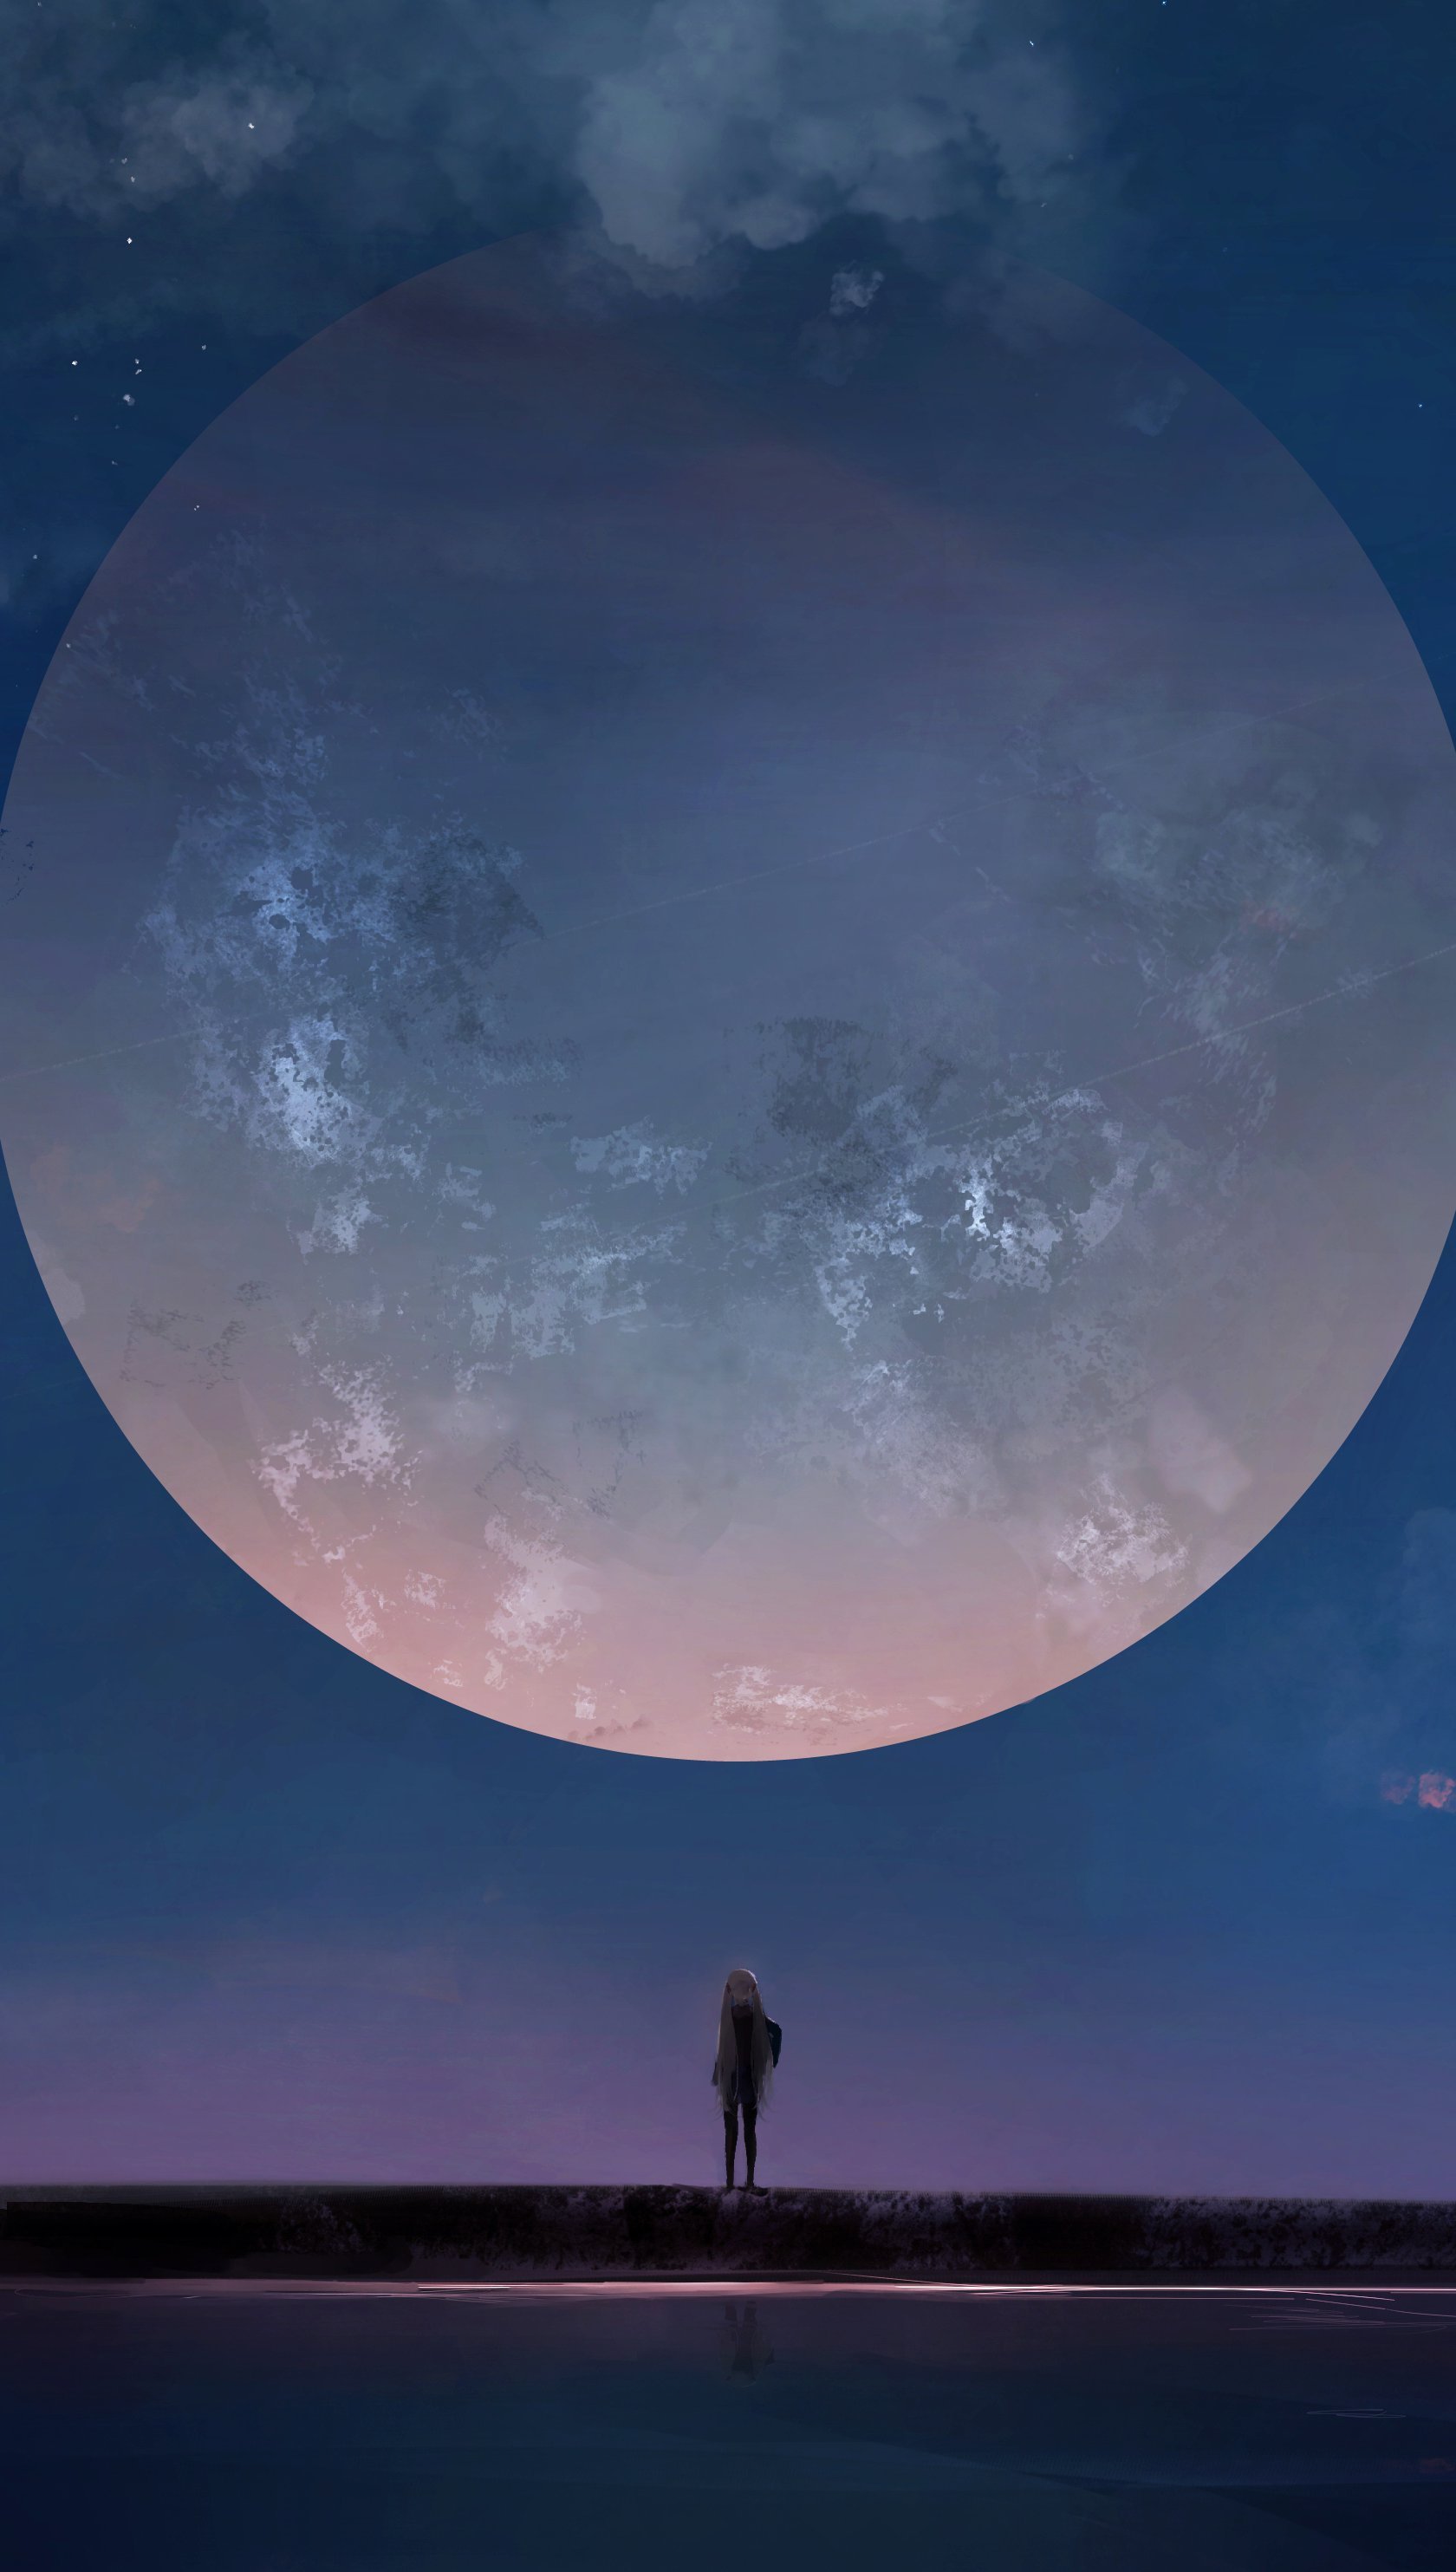 Wallpaper Anime girl at night with moon Vertical